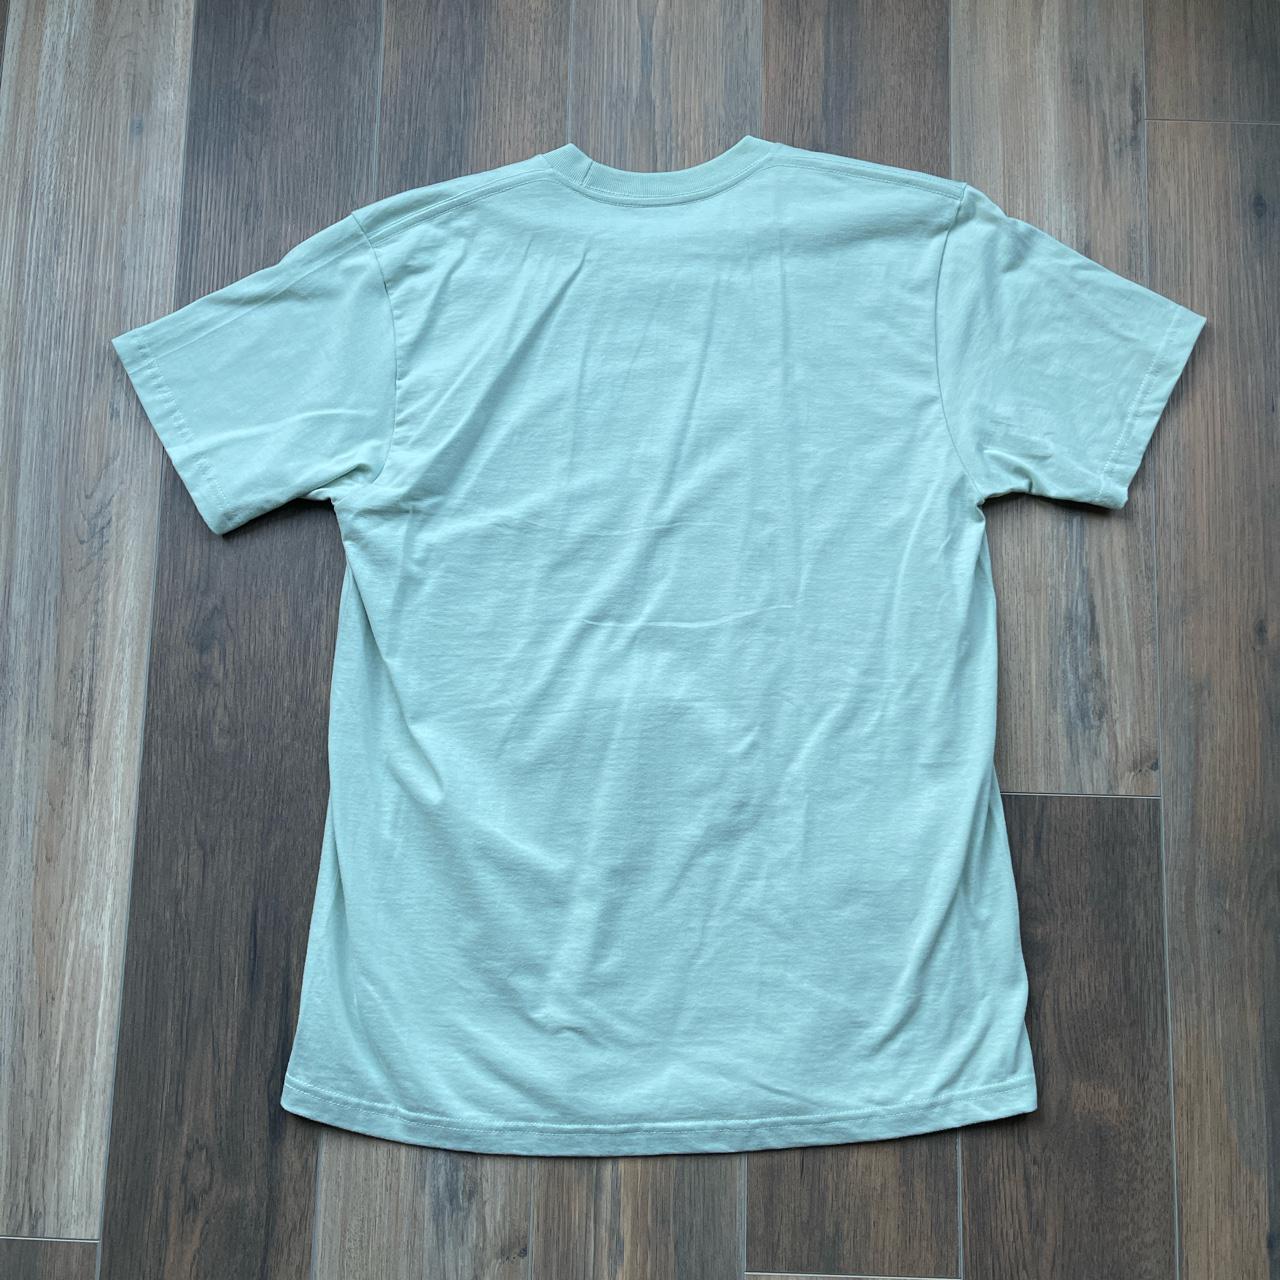 Supreme Wind Tee SS21 Pale Aqua. Shirt is out of... - Depop